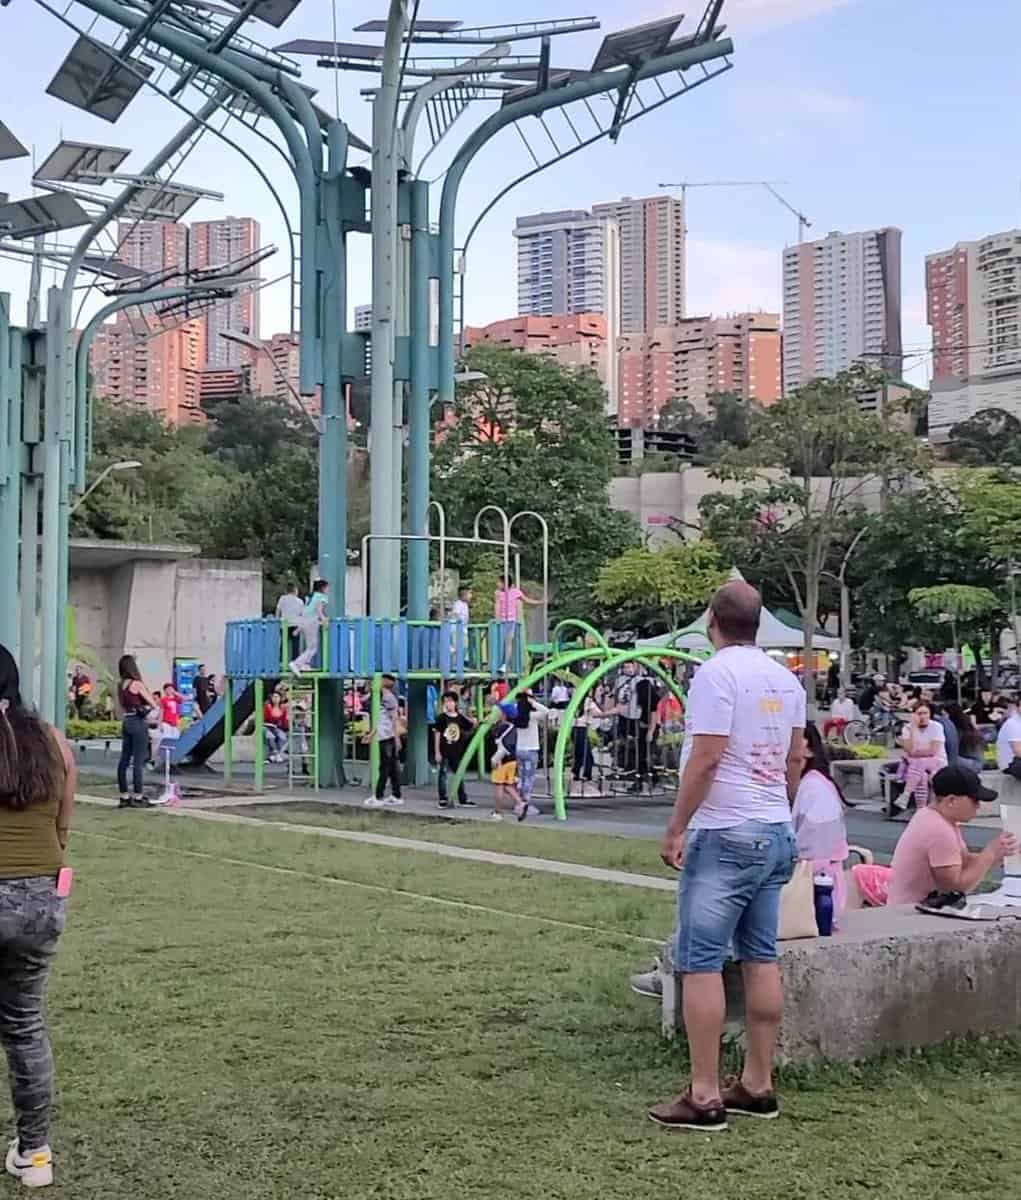 living in Medellin as expats